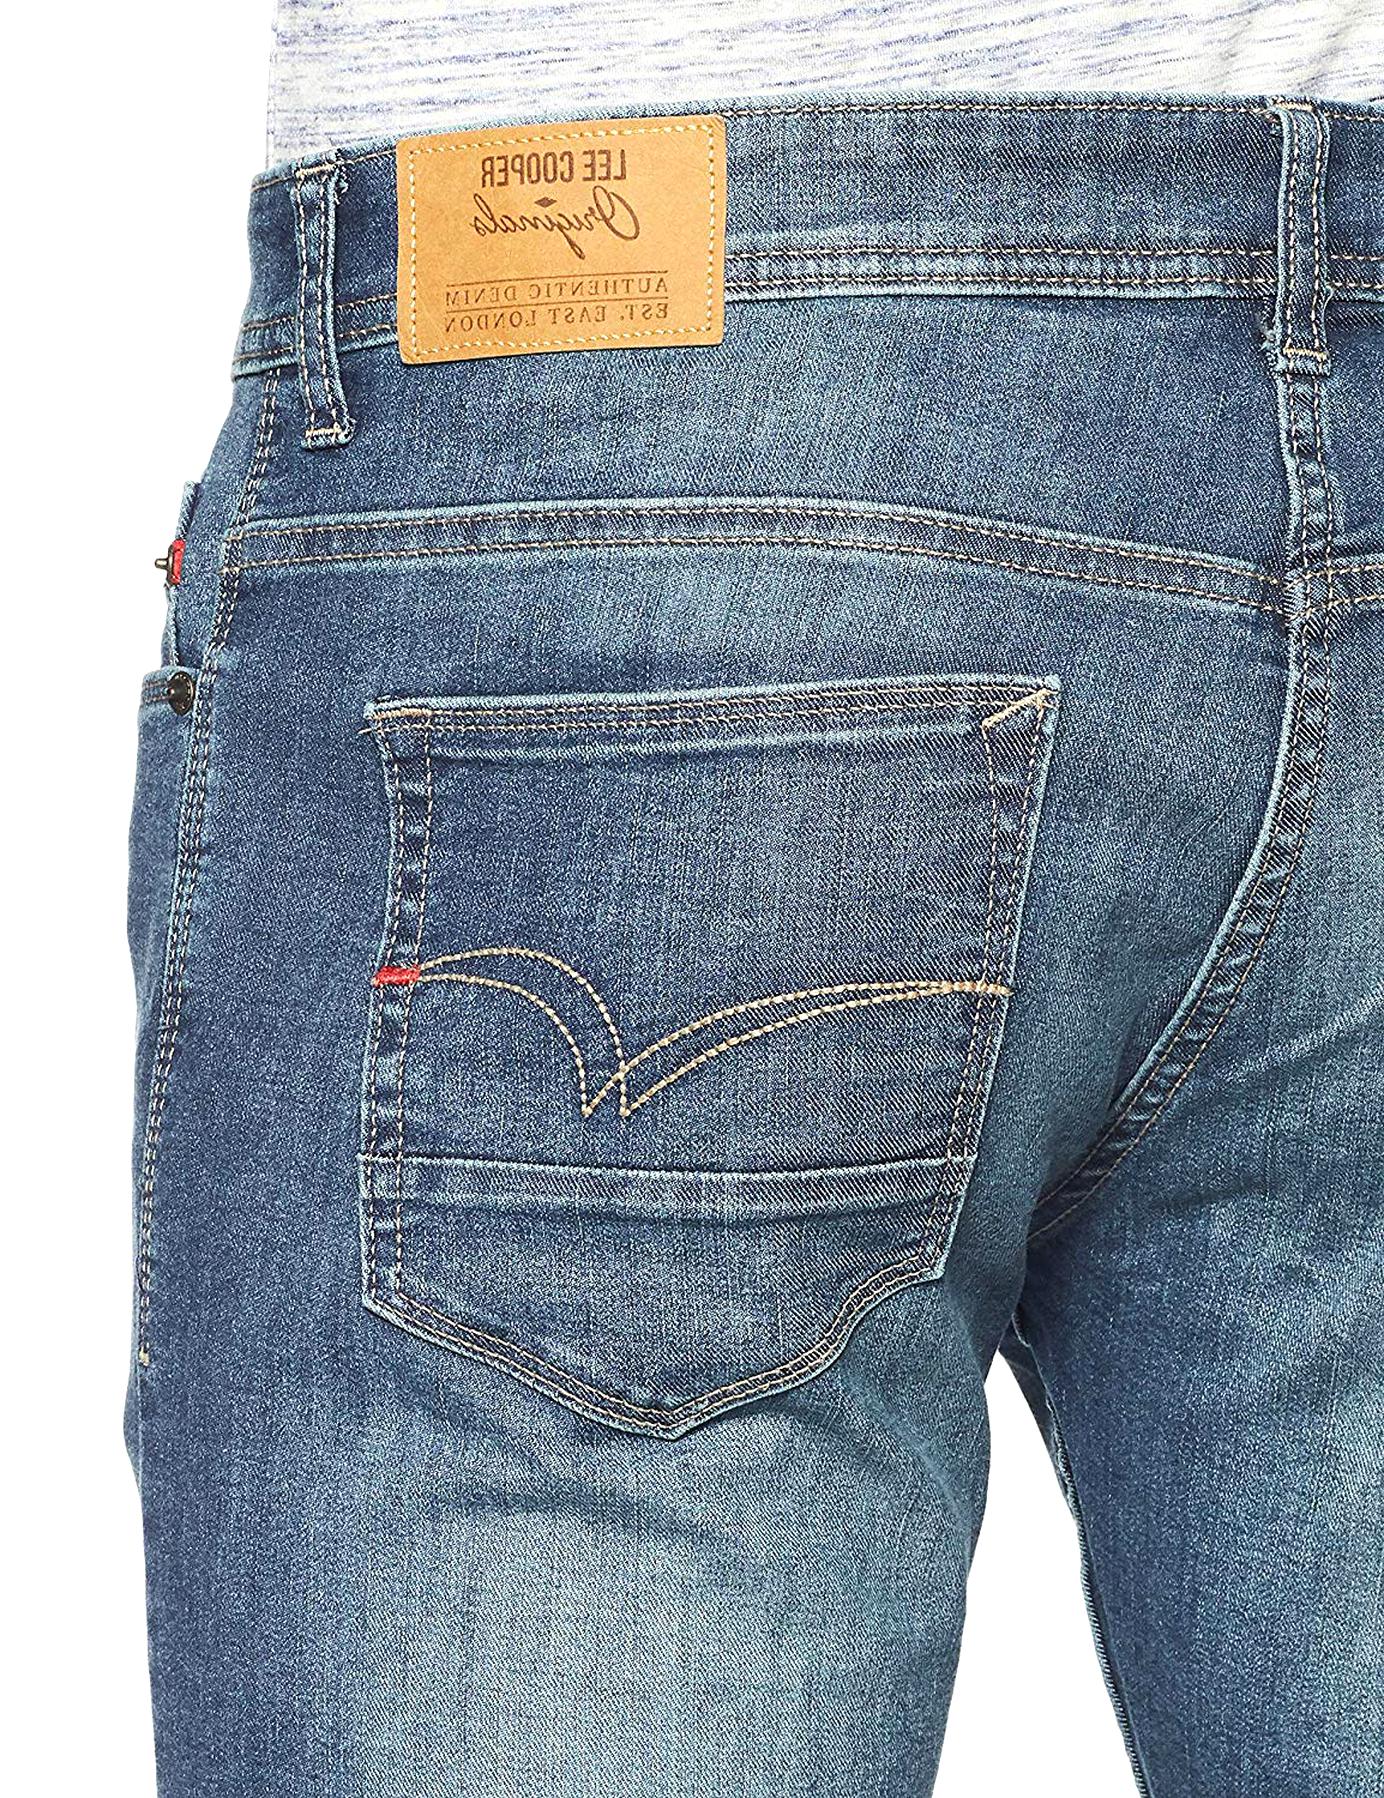 Lee Cooper Jeans for sale in UK | 86 used Lee Cooper Jeans